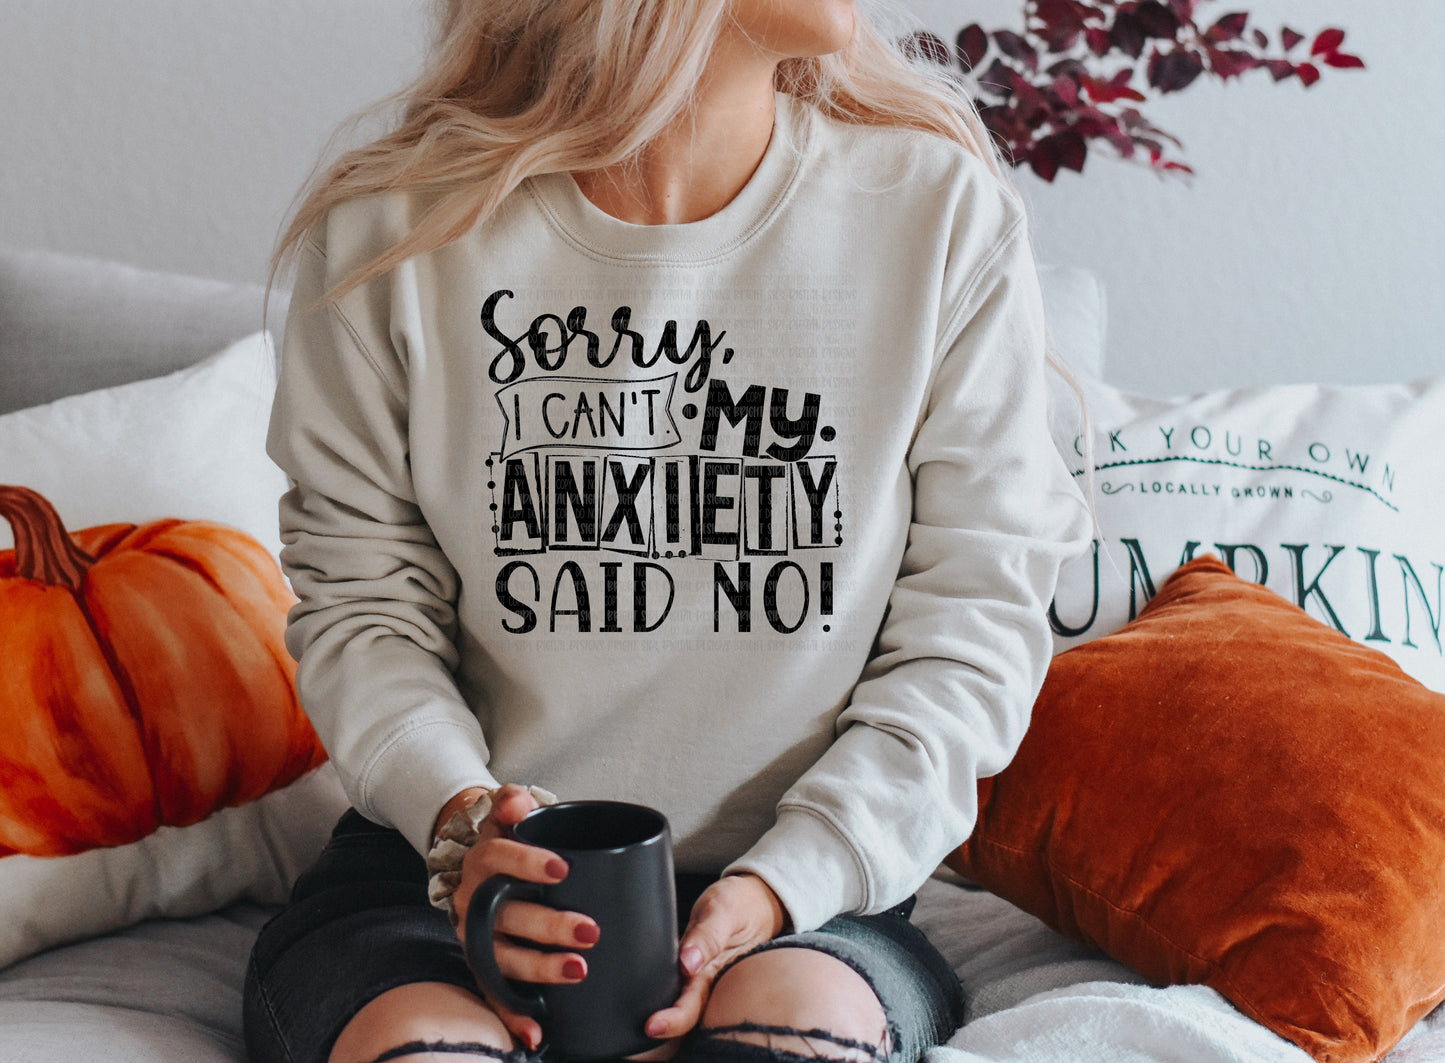 Sorry I can’t. My anxiety said no.